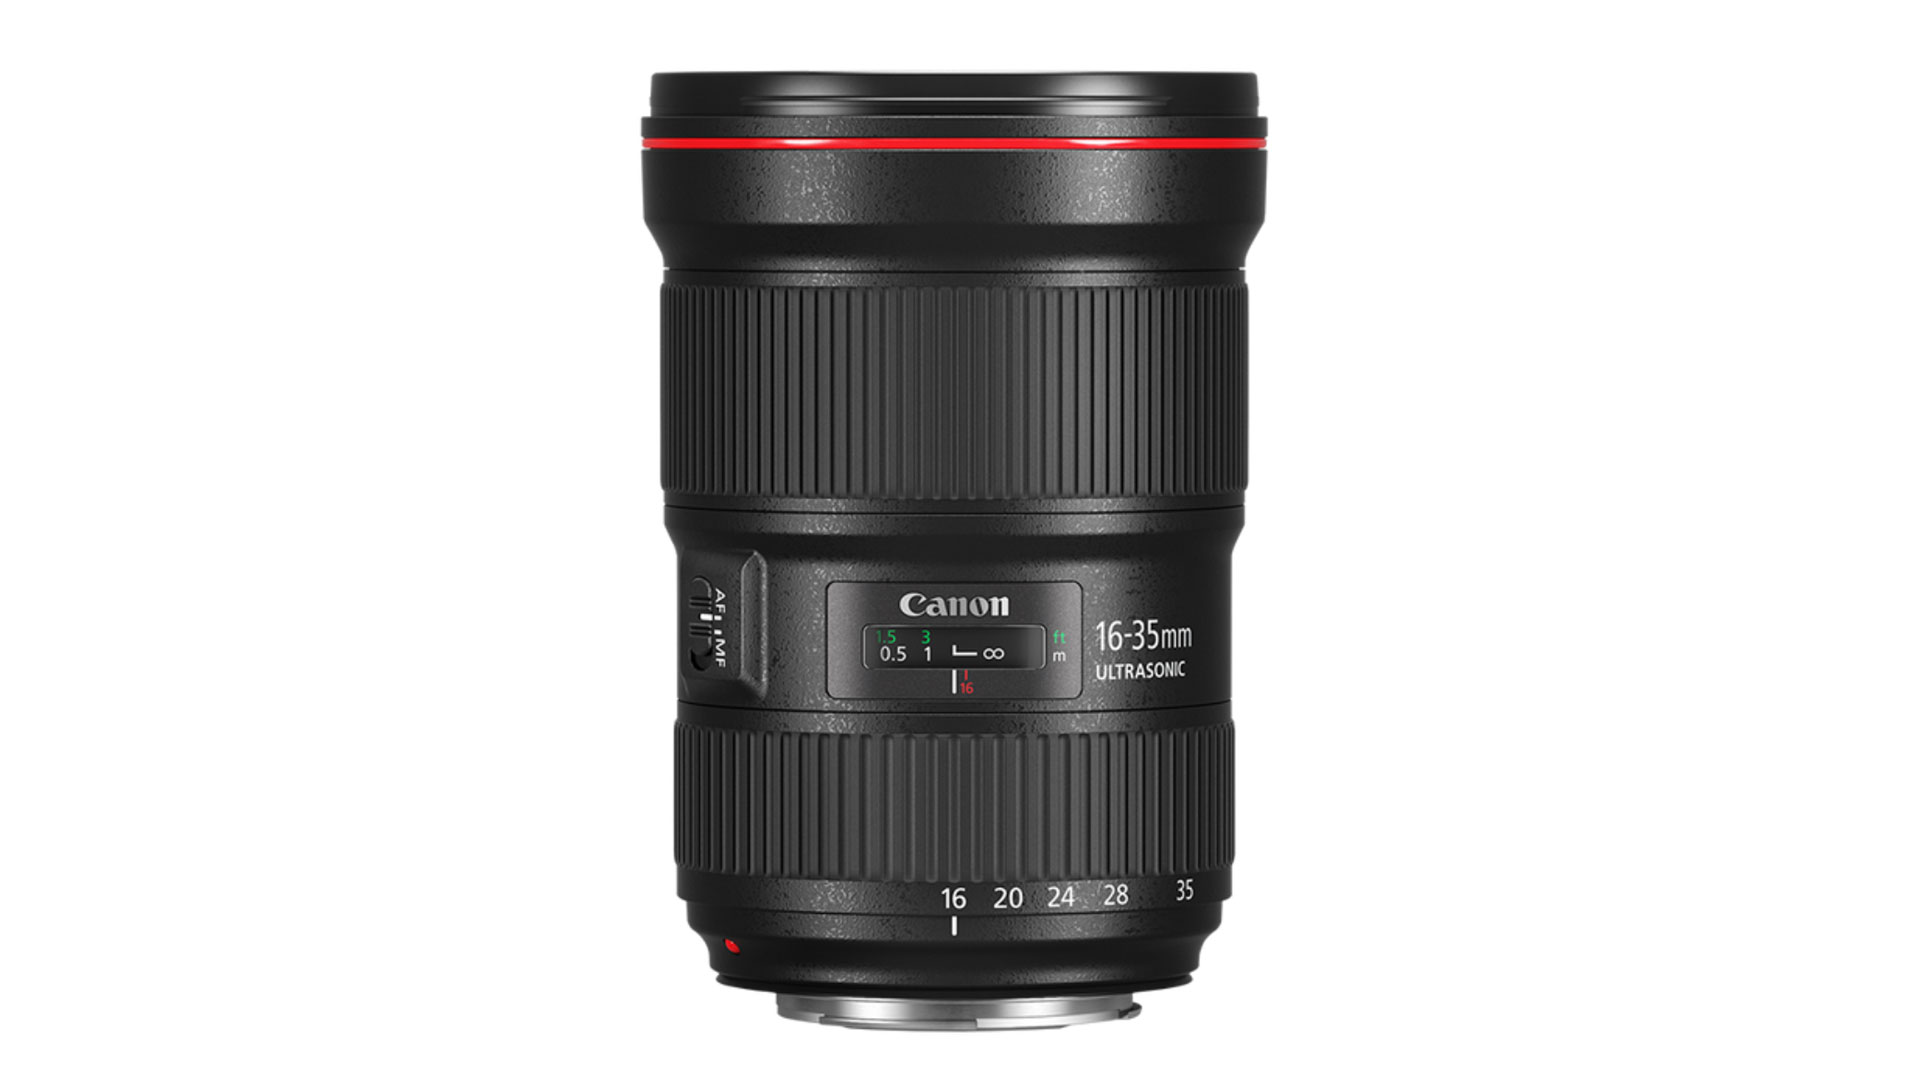 Best lenses for the Canon 6D Mark II: Canon EF 16-35mm f/2.8L III USM